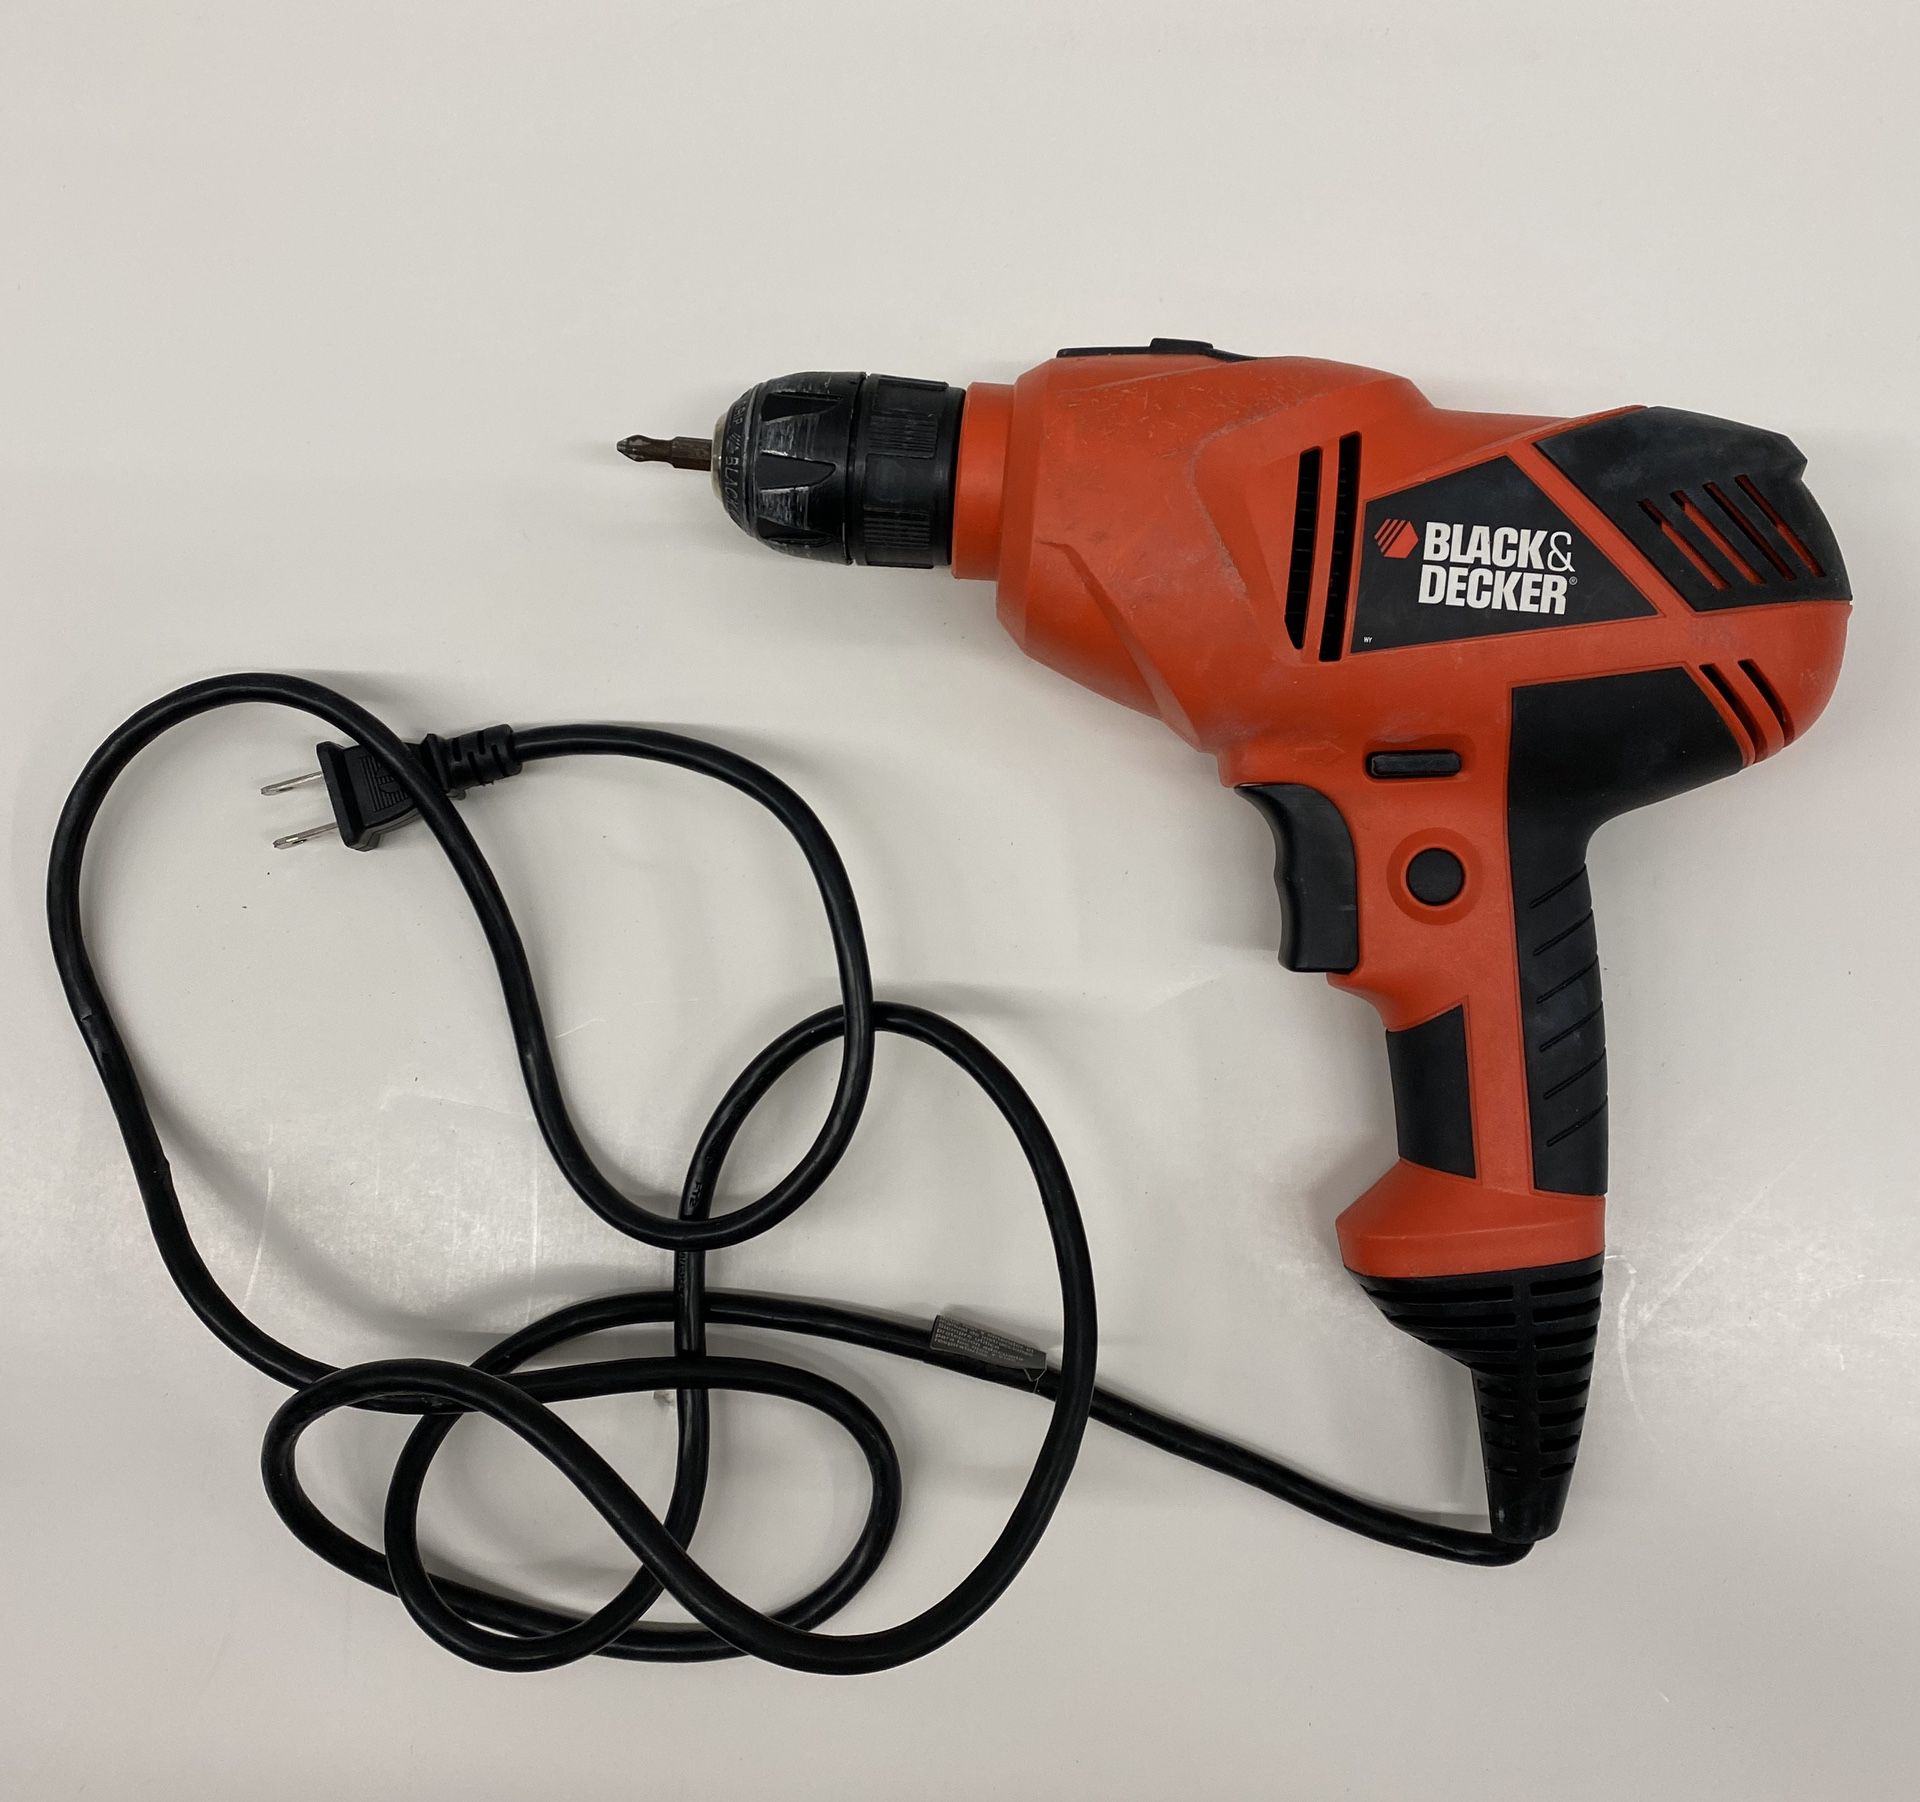 Black & Decker DR250 3/8" Corded Drill With Bag